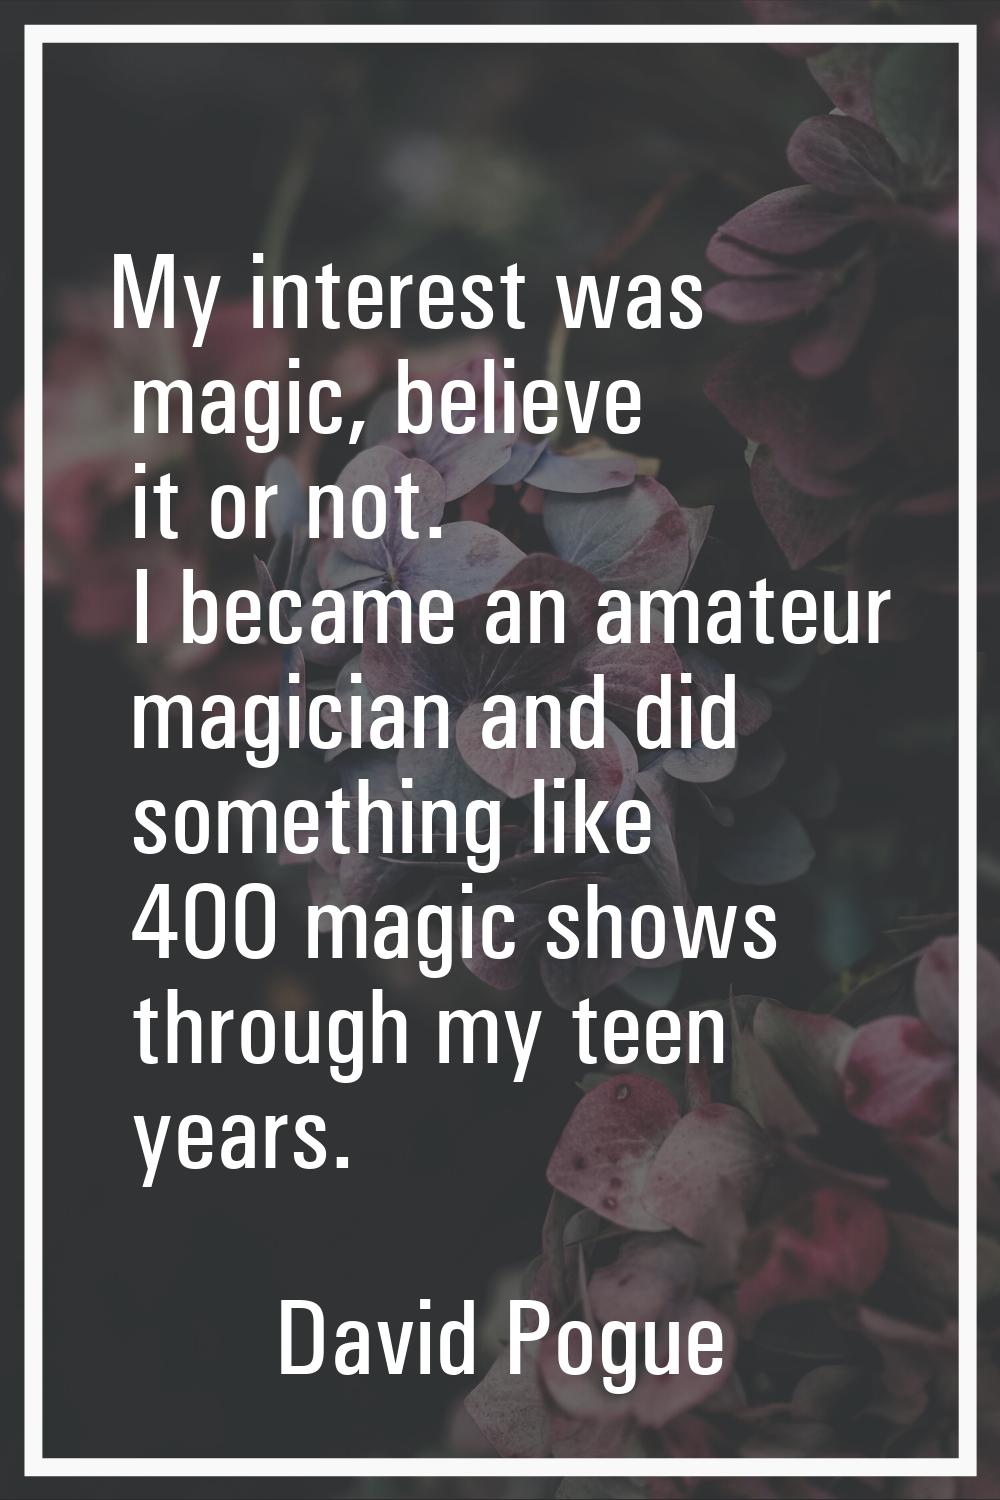 My interest was magic, believe it or not. I became an amateur magician and did something like 400 m